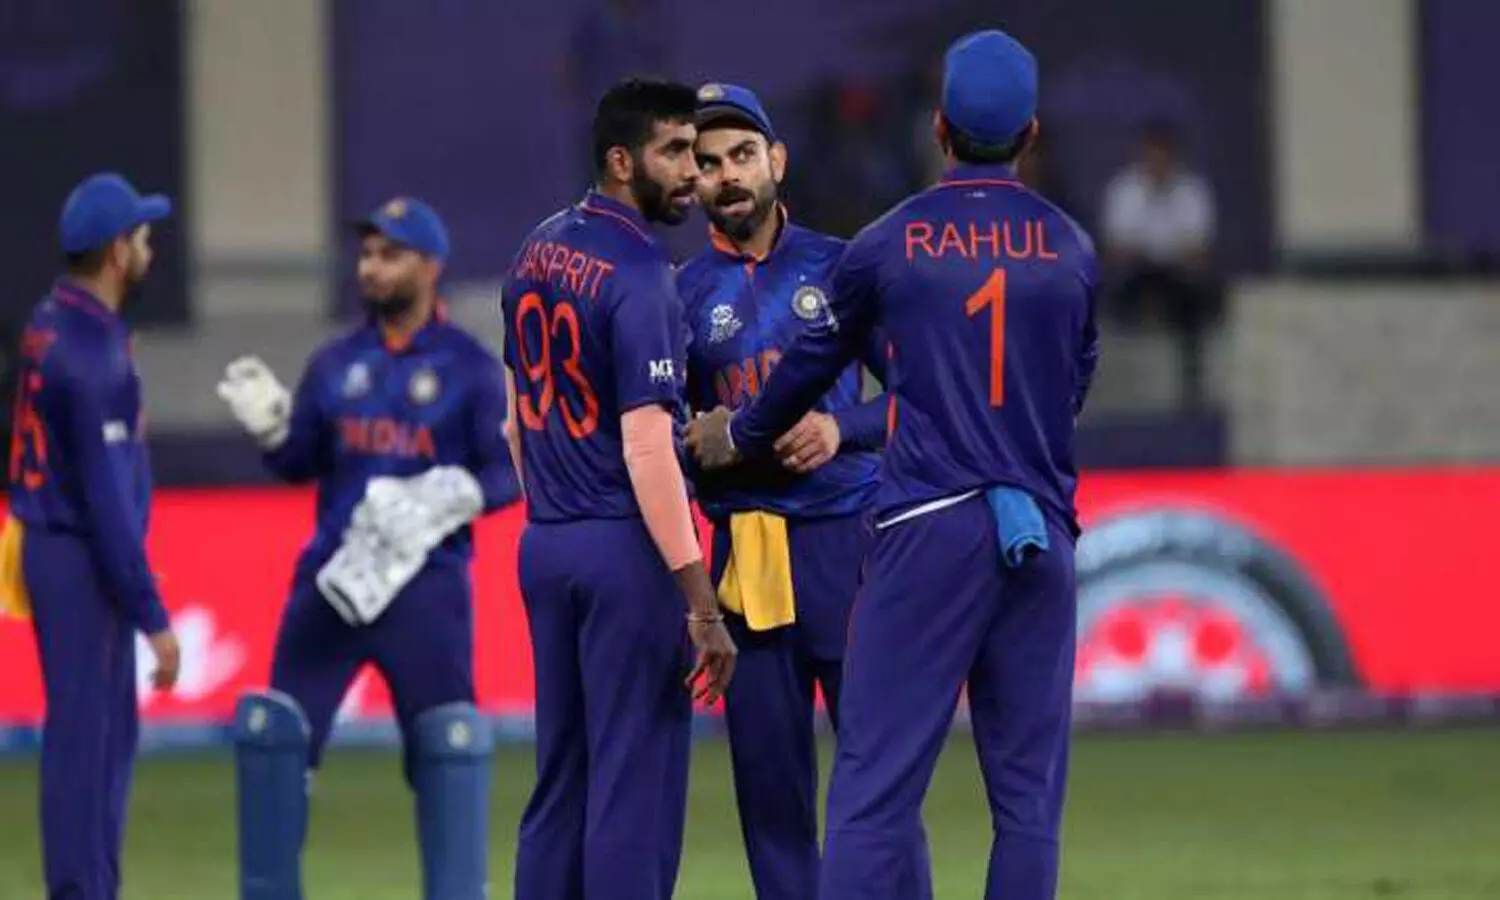 India vs New Zealand T20 World Cup 2021: When and where to watch live streaming